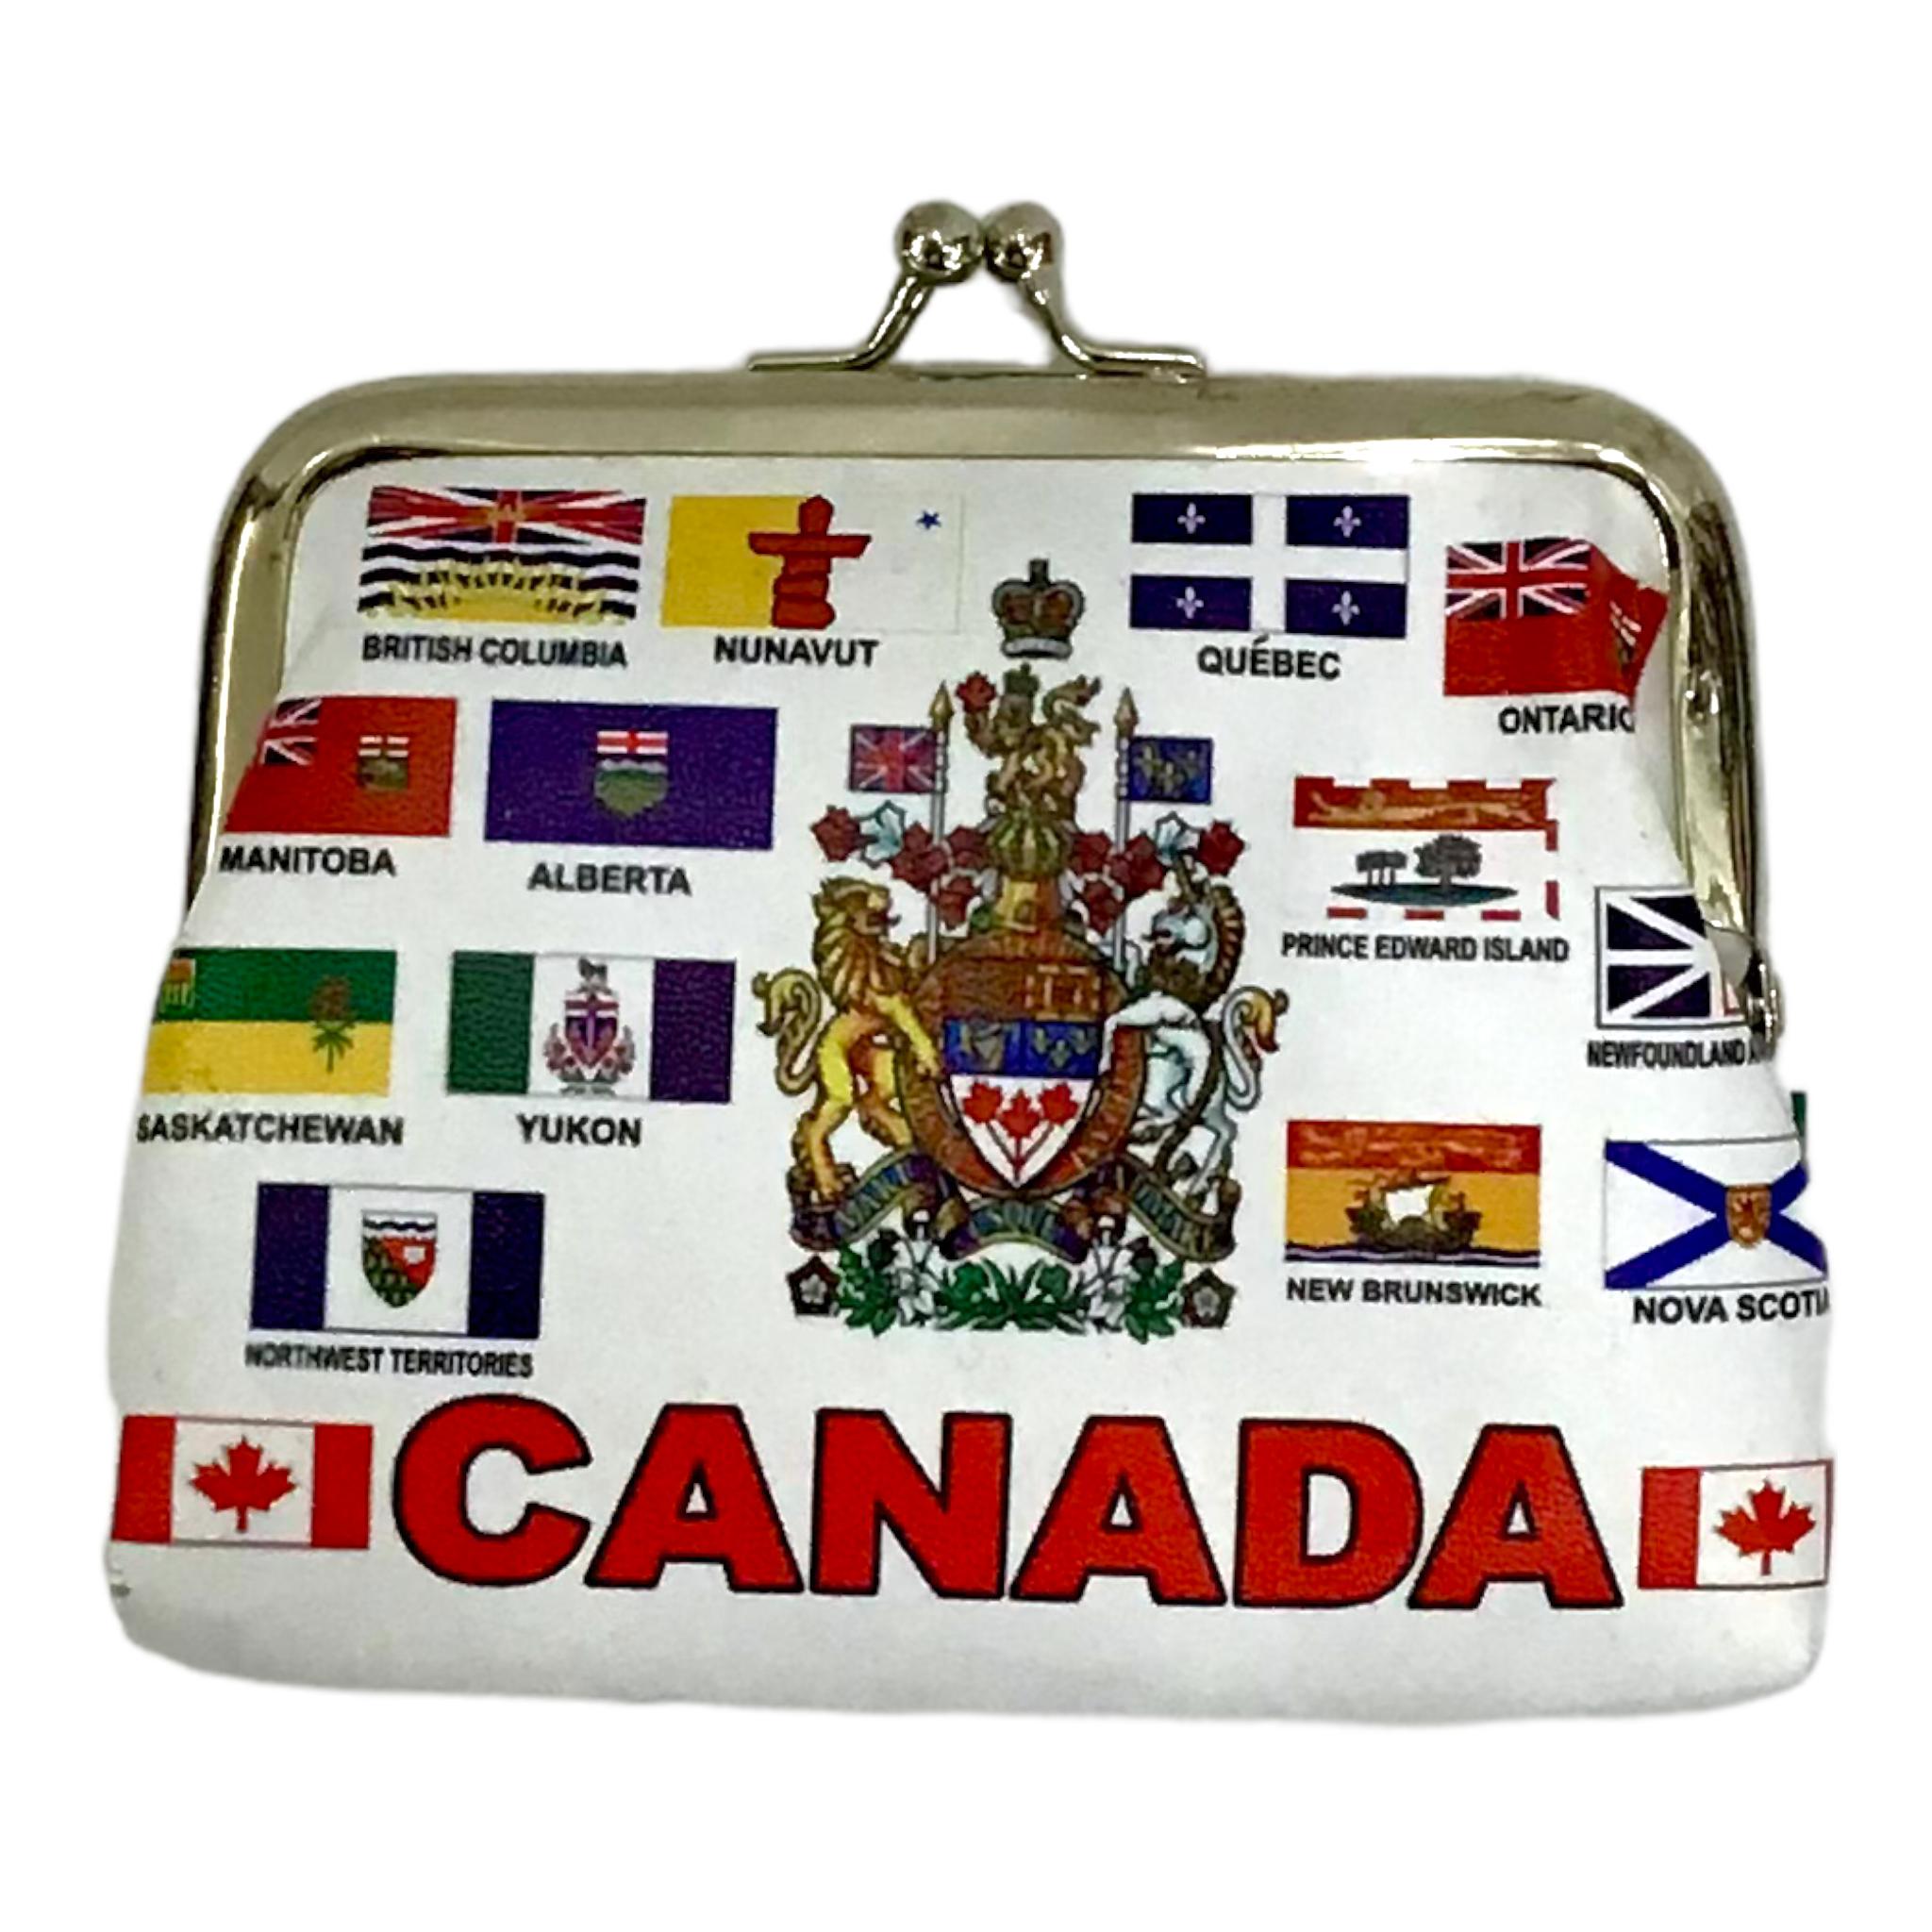 Canada Provincial Flags Coin Purse Wallet Buckle Kiss-Lock Small Faux Leather Change Pouch Gift For Women